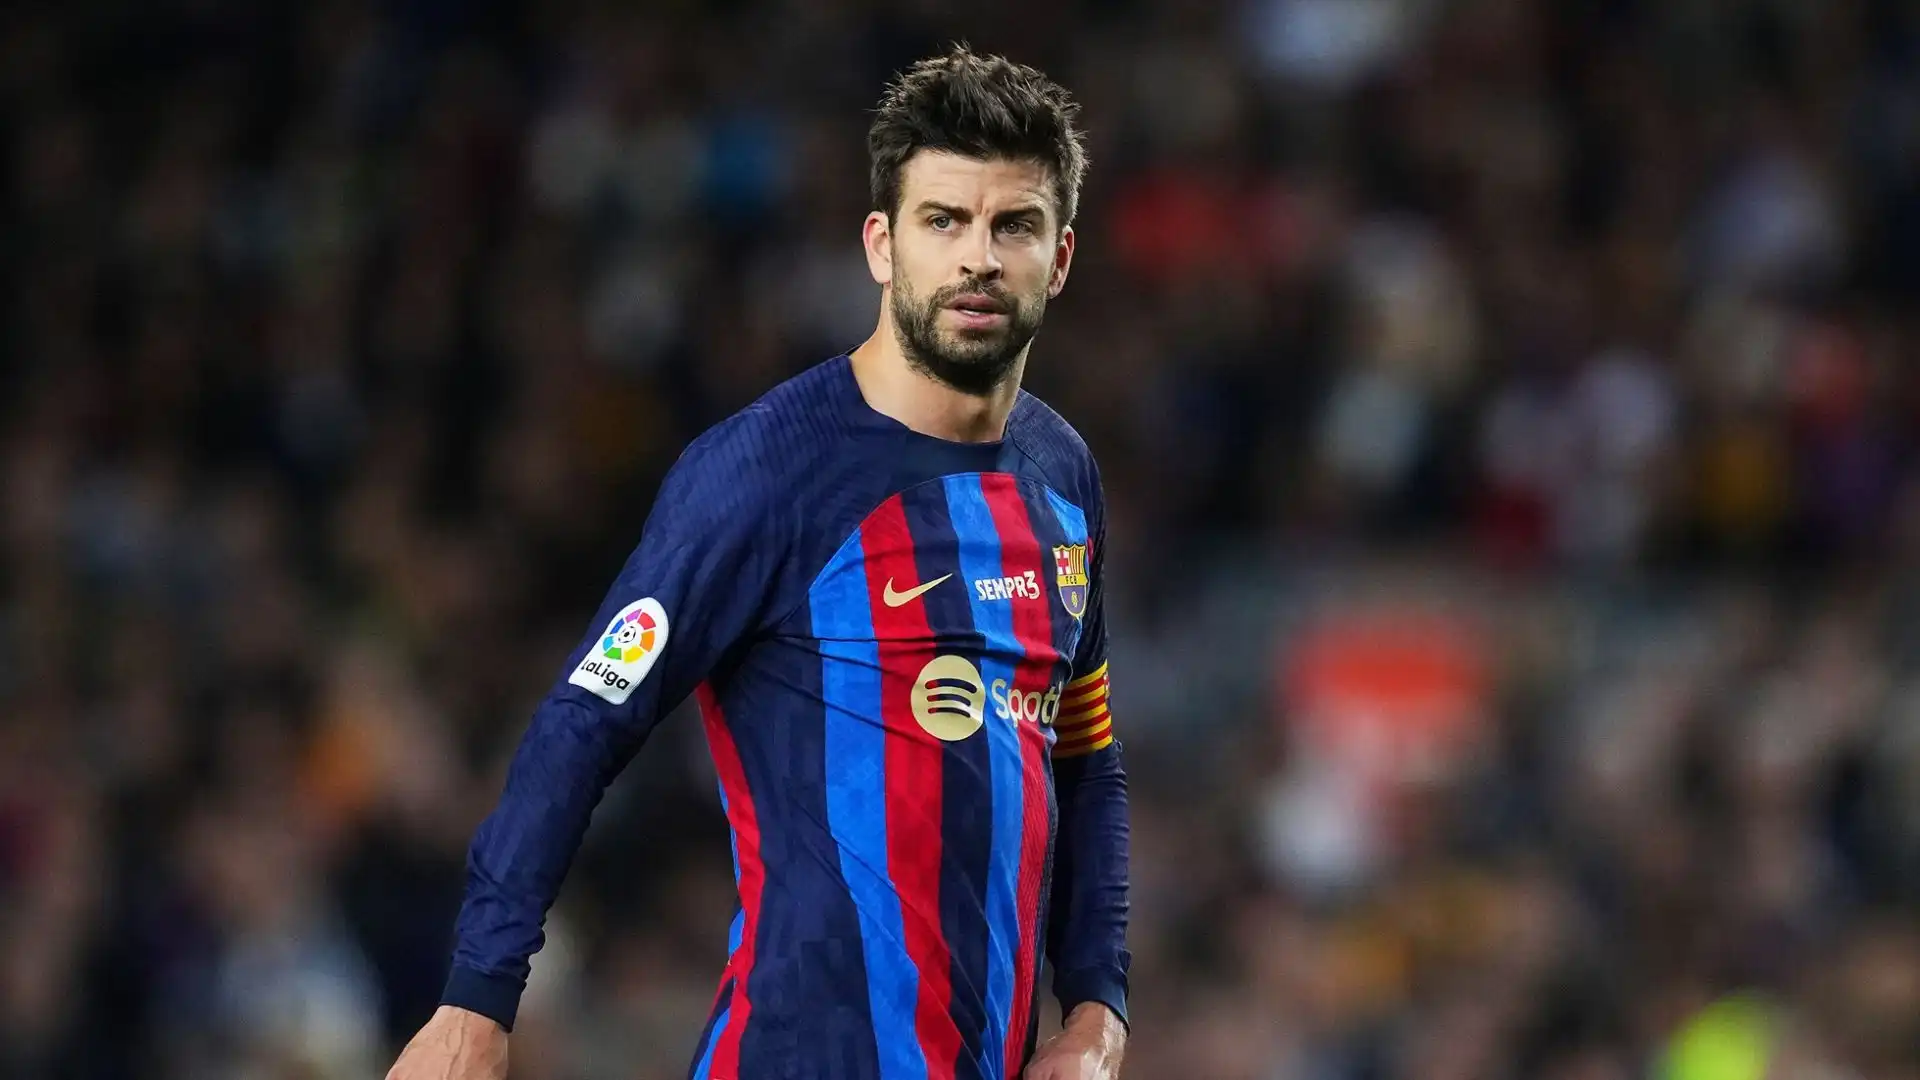 Gerard Piqué: Master in Business, Media, Sports and Entertainment